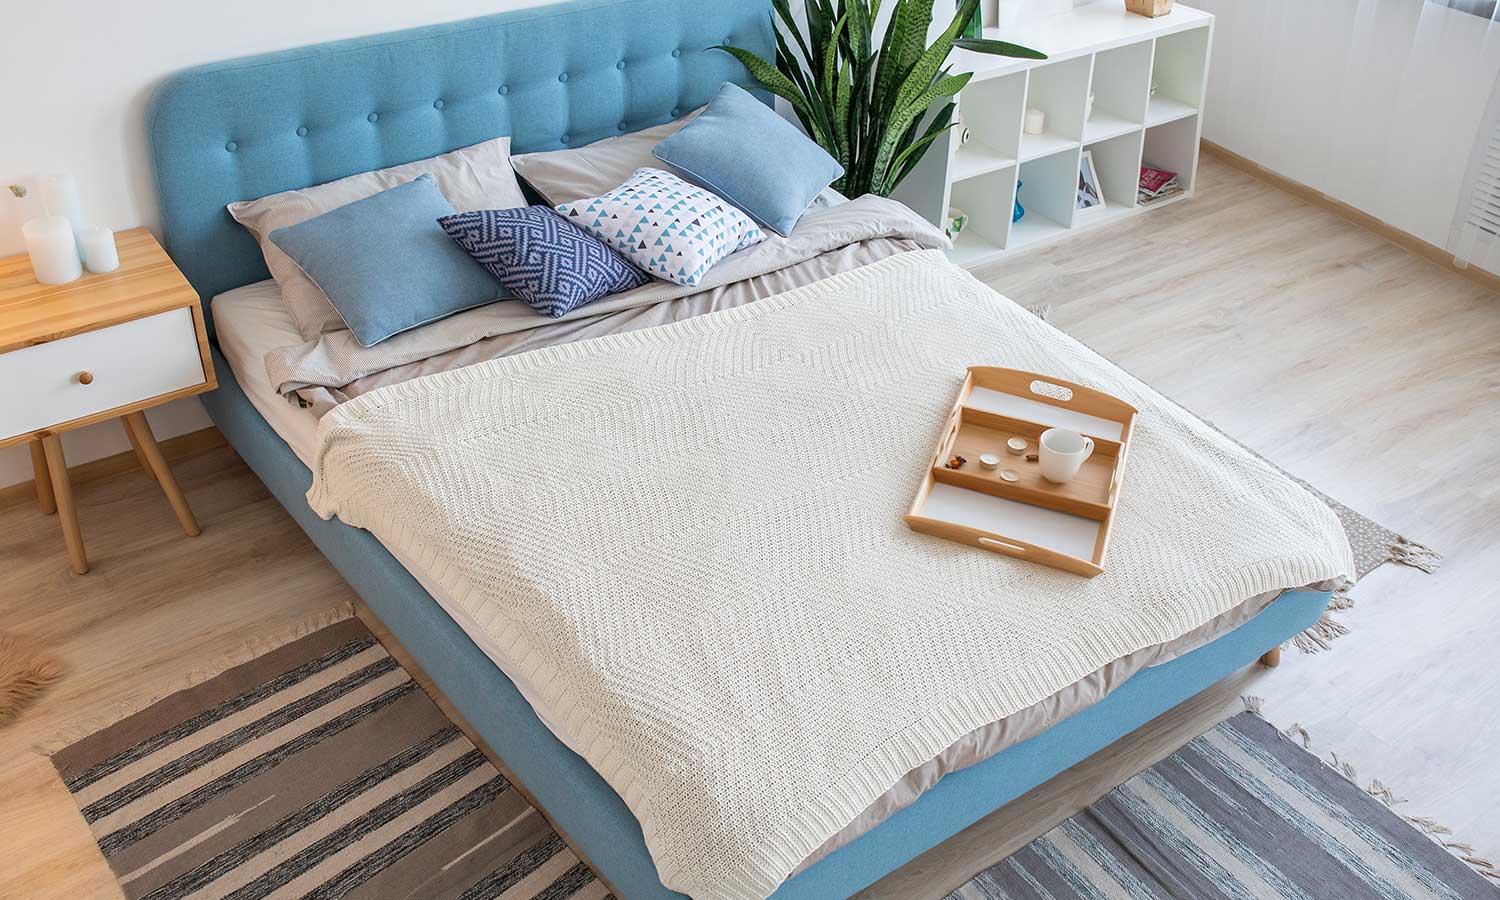 75 Diffe Types Of Beds For Every, How To Make A King Size Bed Look Good